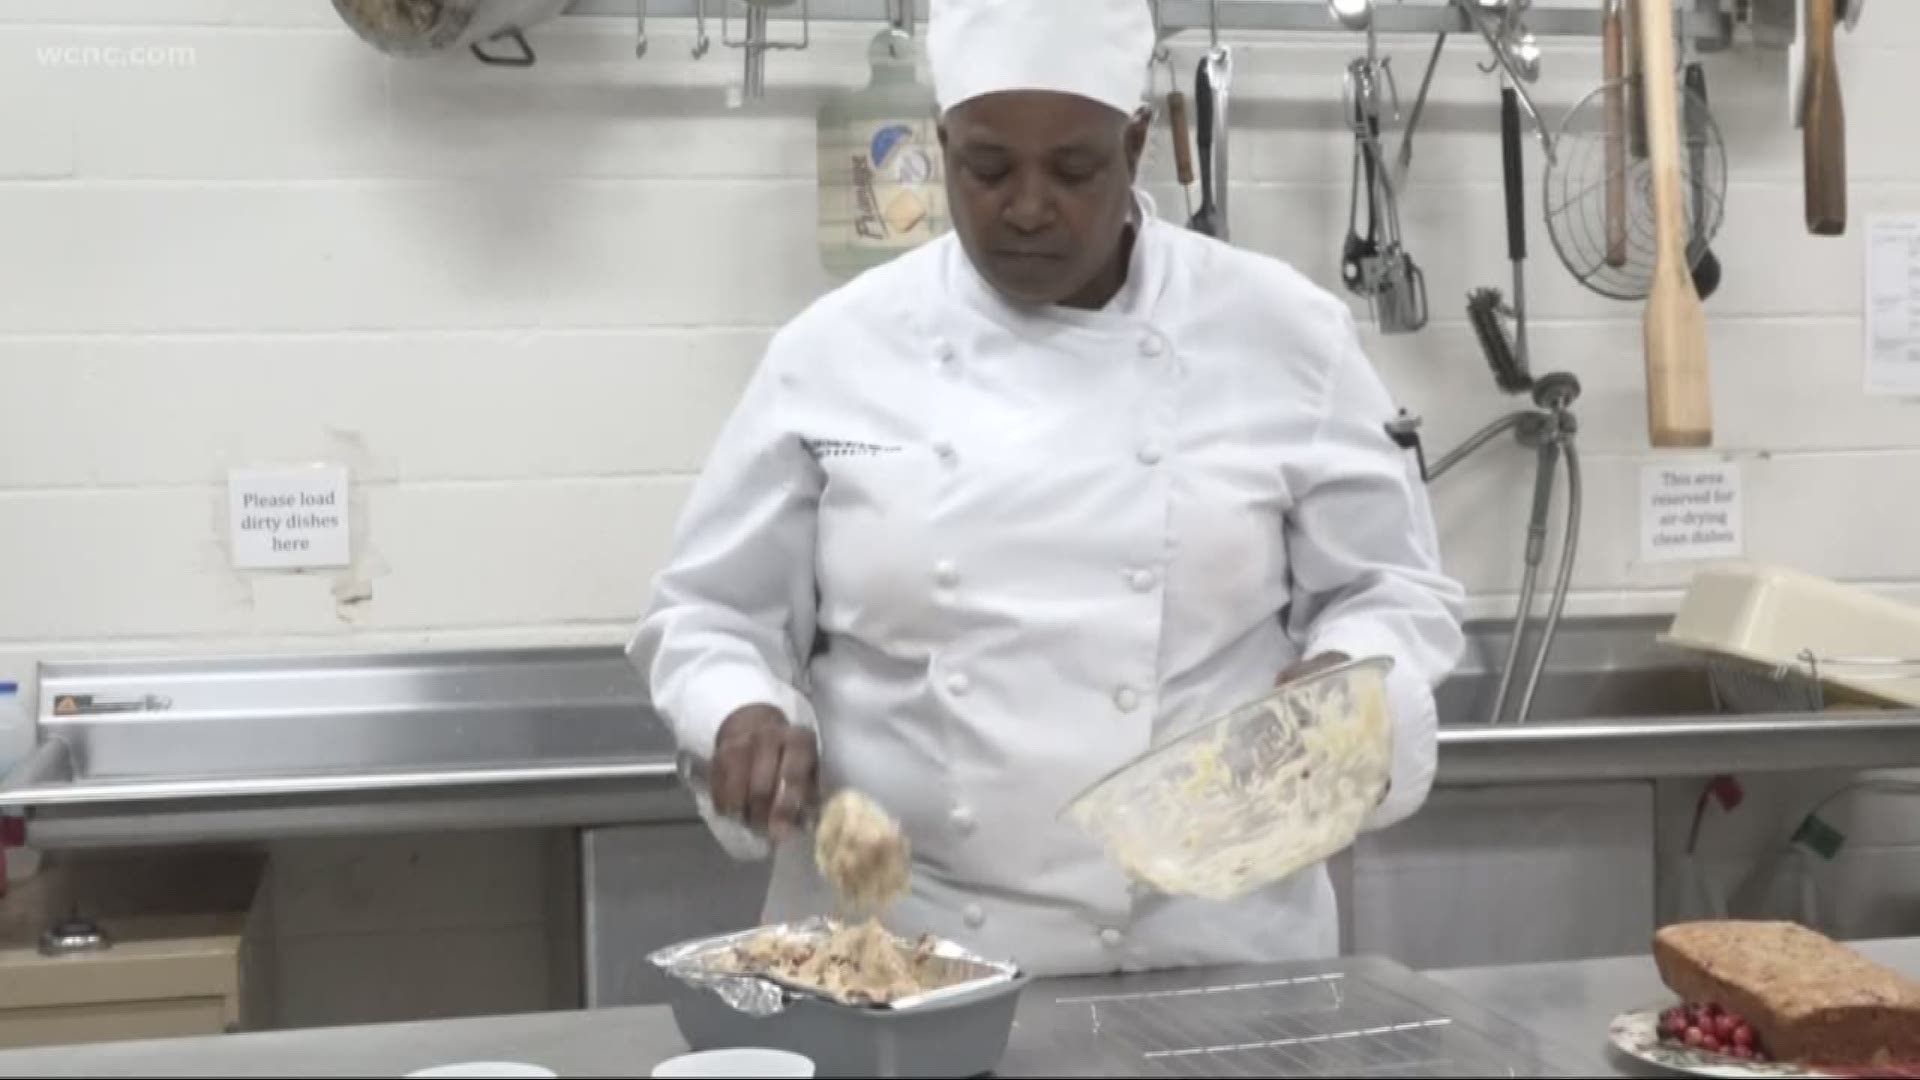 Kim Alexander is planning to open Mica's bakery in uptown to pave the way to successful entrepreneurship.